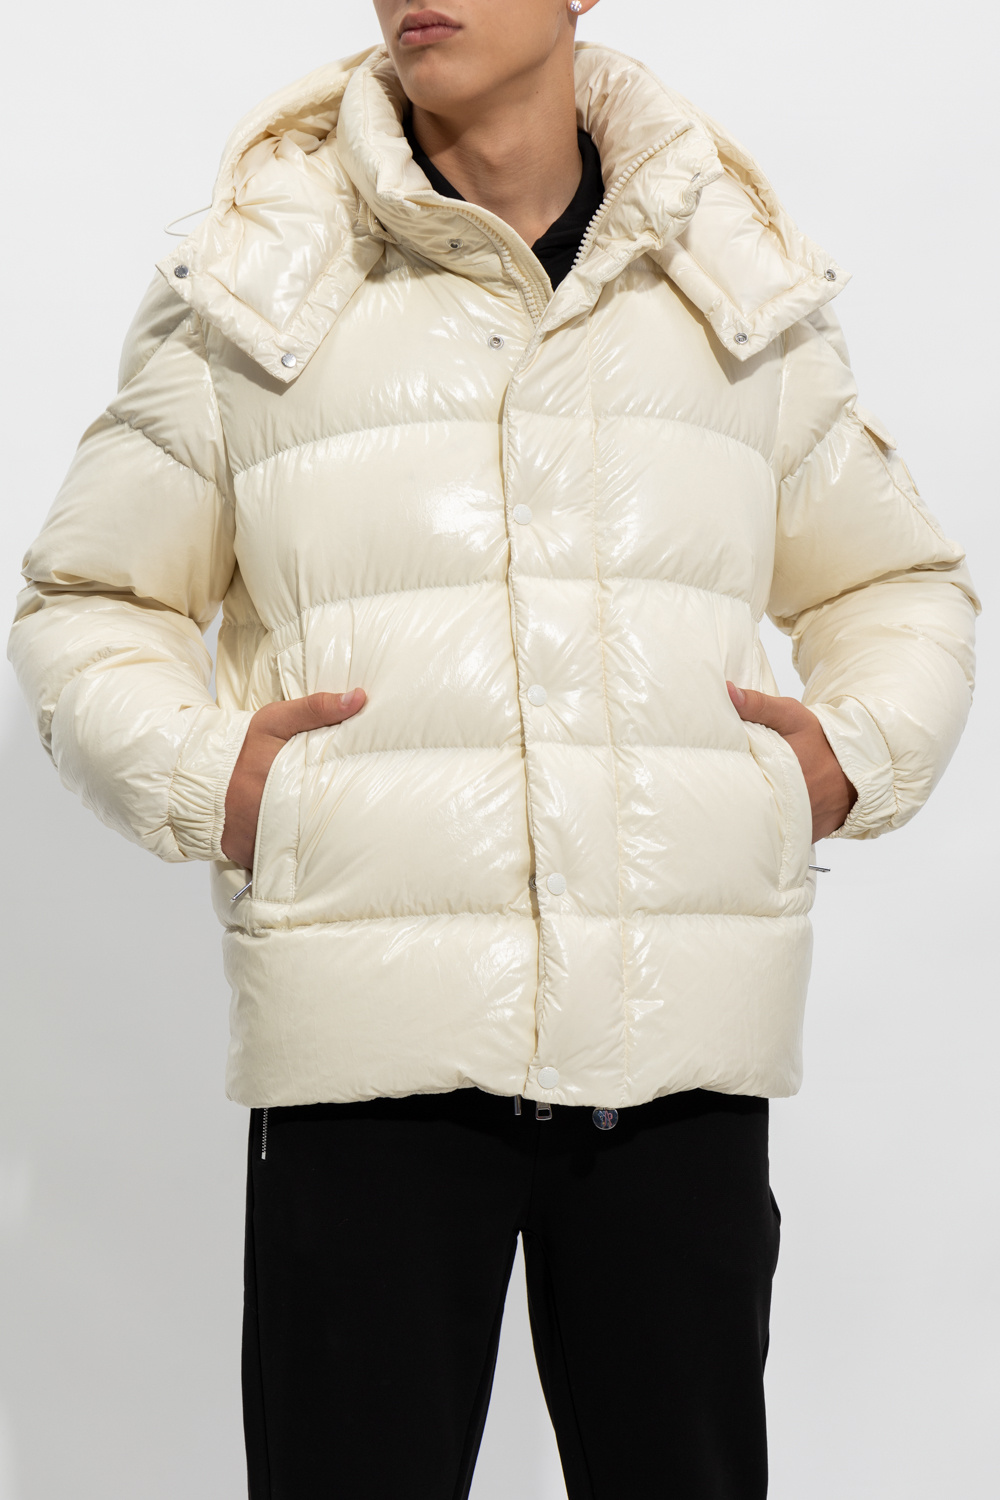 Moncler Paper jacket from ‘MONCLER 70th ANNIVERSARY’ limited collection